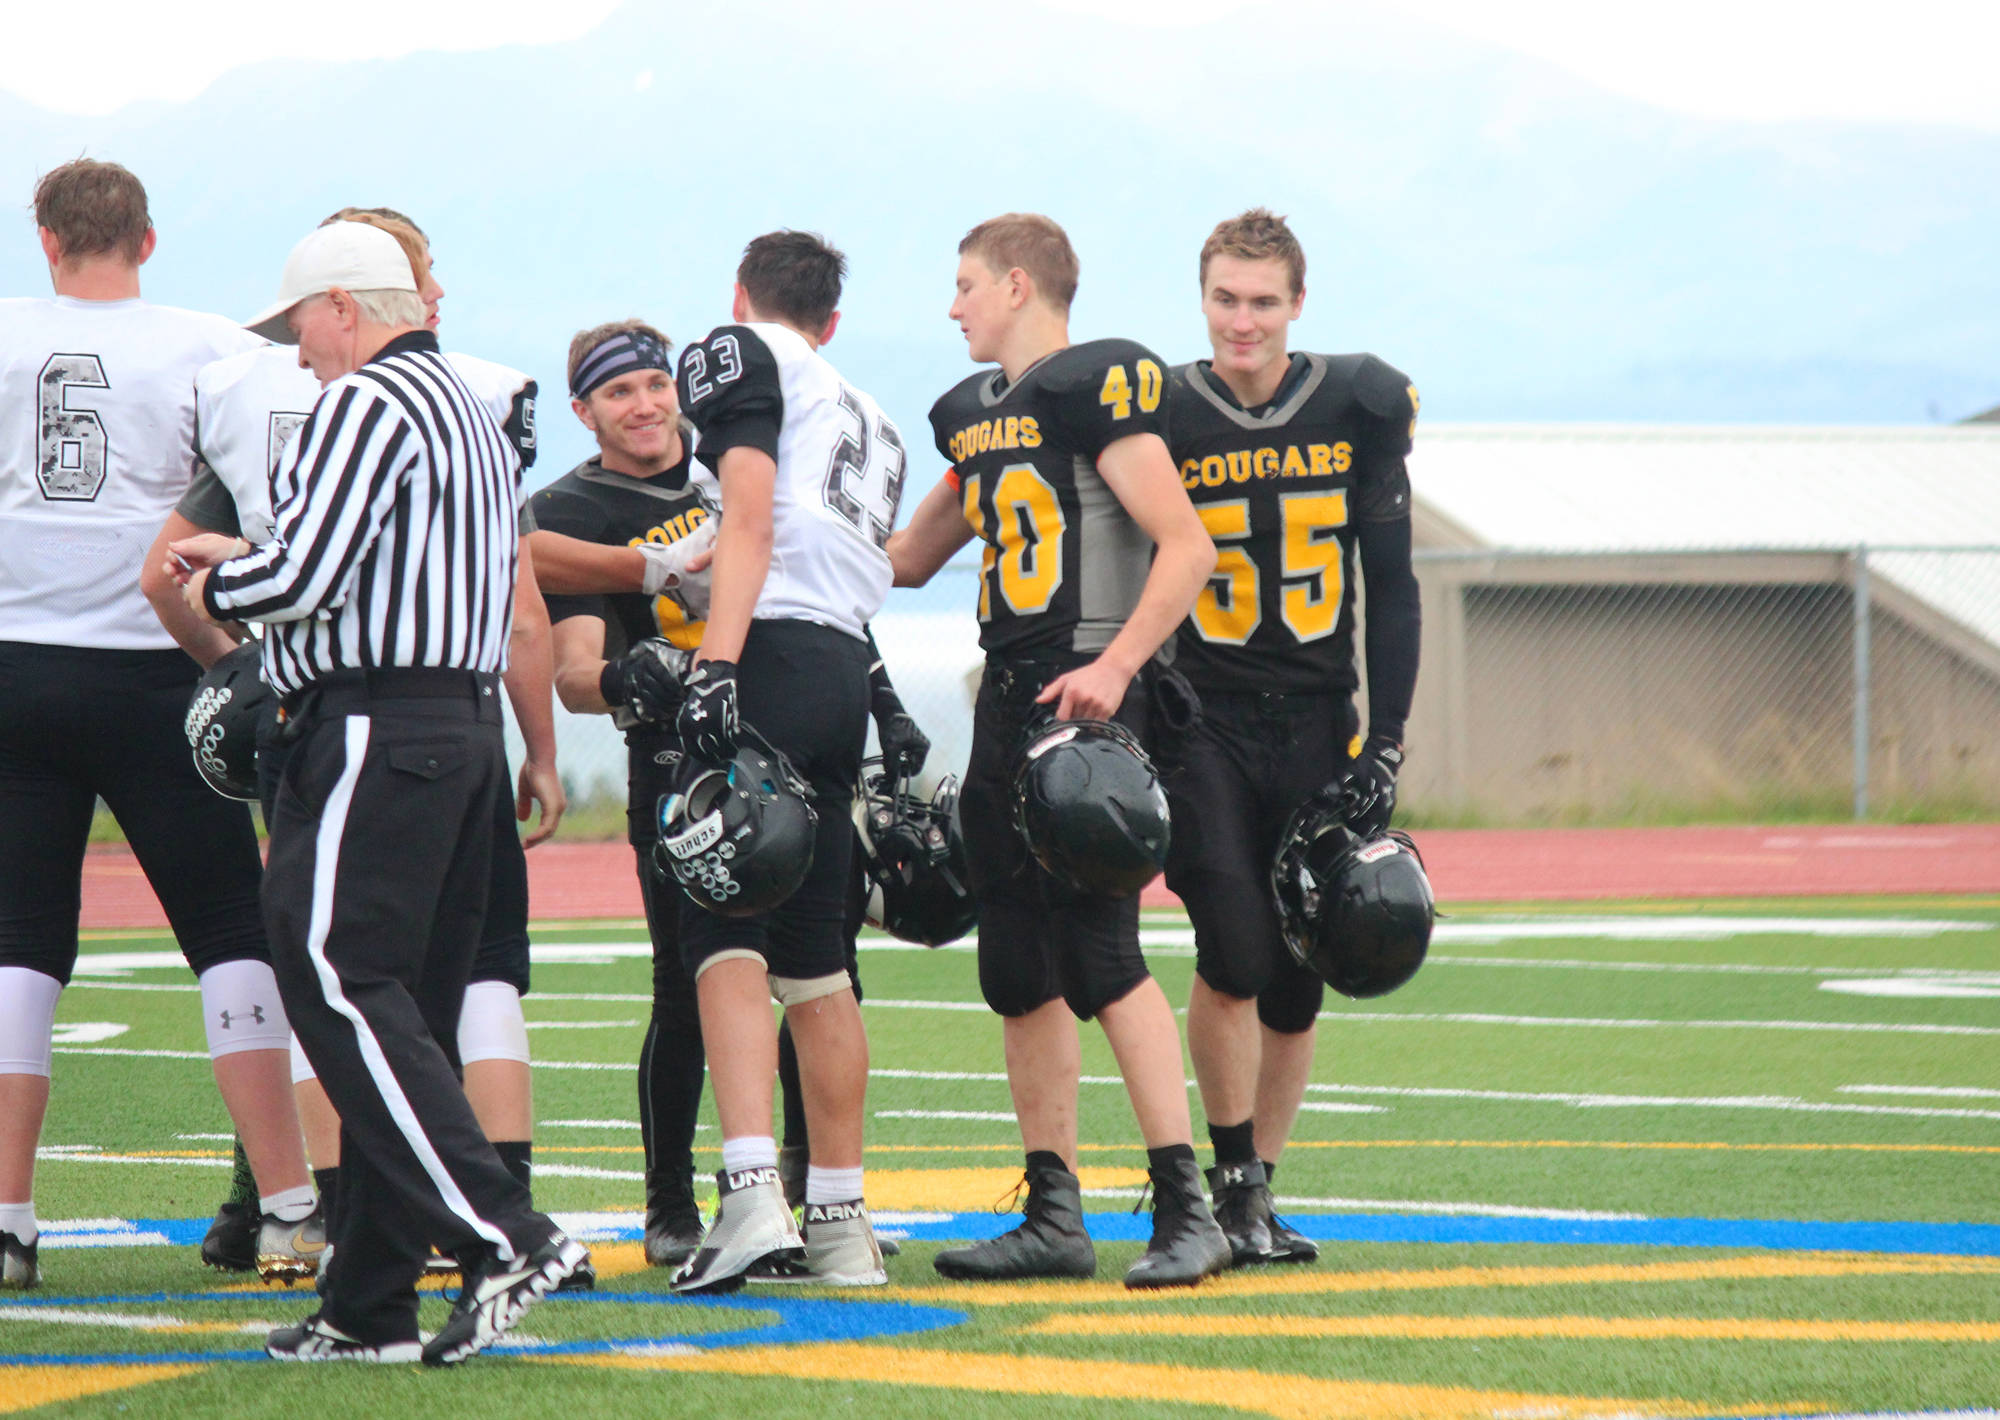 Cougar football players senior David Sanarov, left, sophomore Anthony Kalugin, center, and senior Nikit Anufriev shake hands with captains of the team from Nikiski before their game Saturday, Sept. 2, 2017 in Homer, Alaska. The Cougars lost 18-40 in their second game of the season. (Photo by Megan Pacer/Homer News)